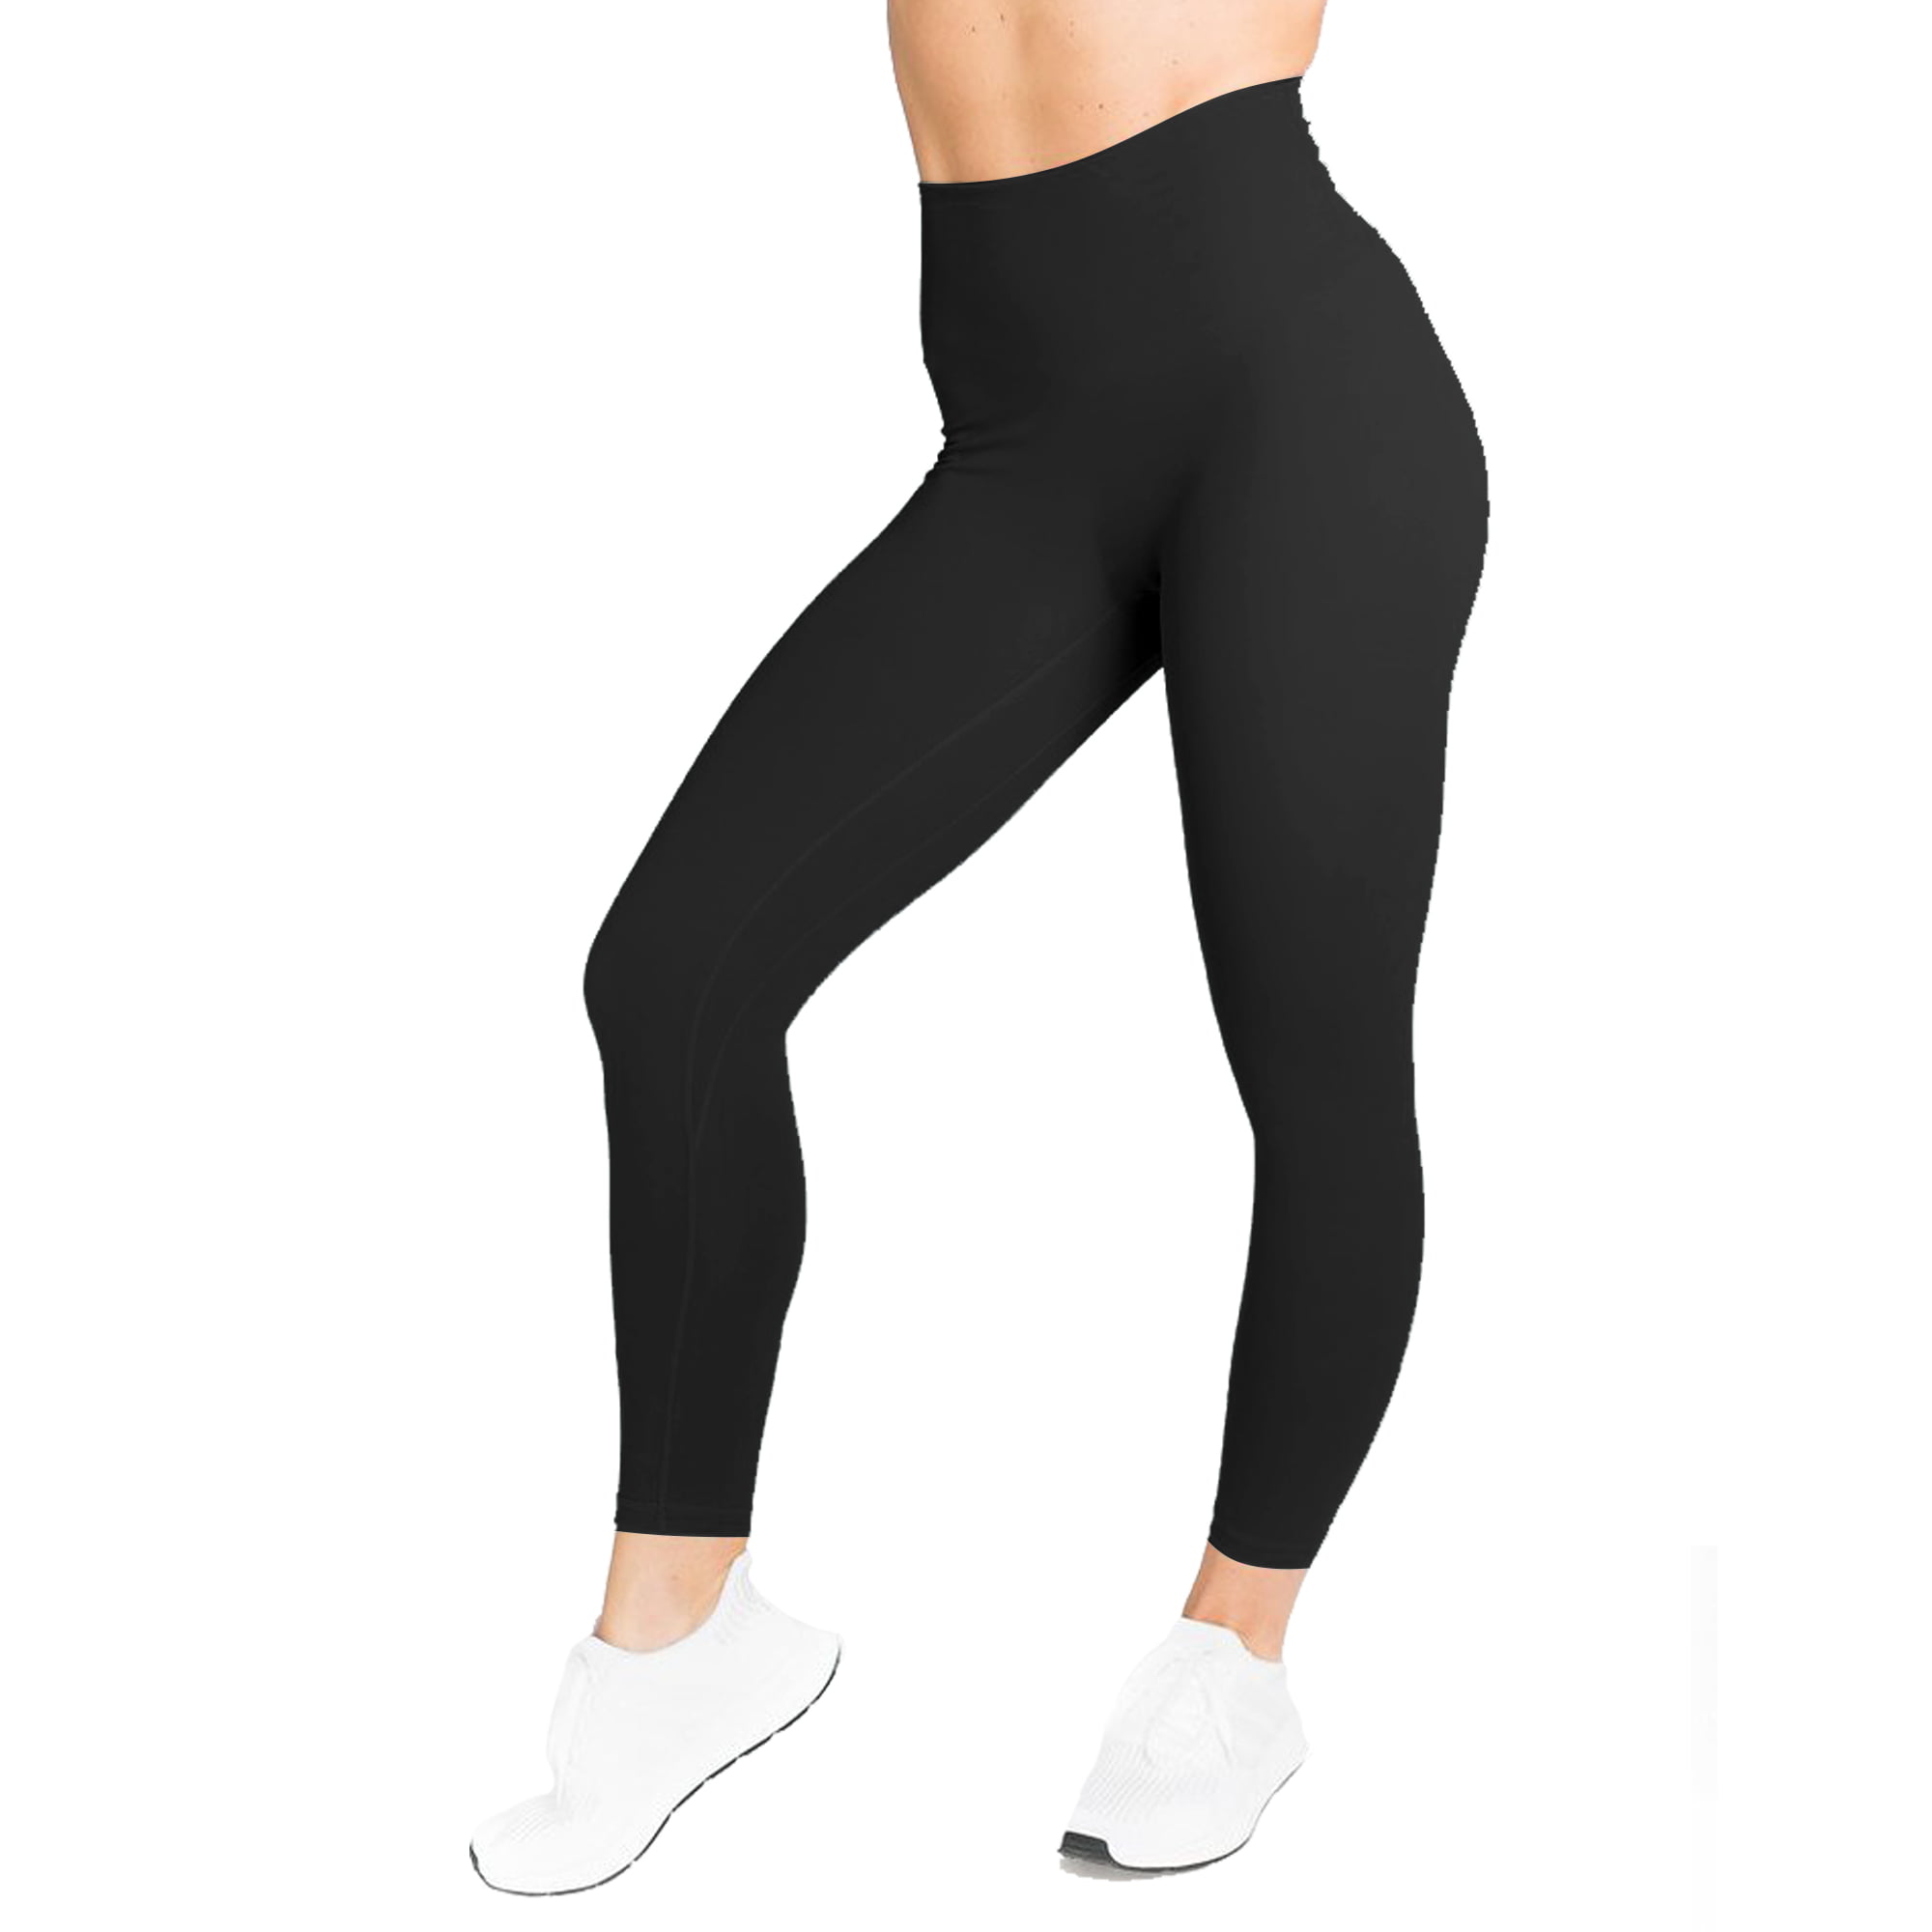 Yoga Pants Women Workout Sport High Waisted Legging Fitness Seamless Tights  Workout Activewear For Running, Gym and Kicking, Black-S